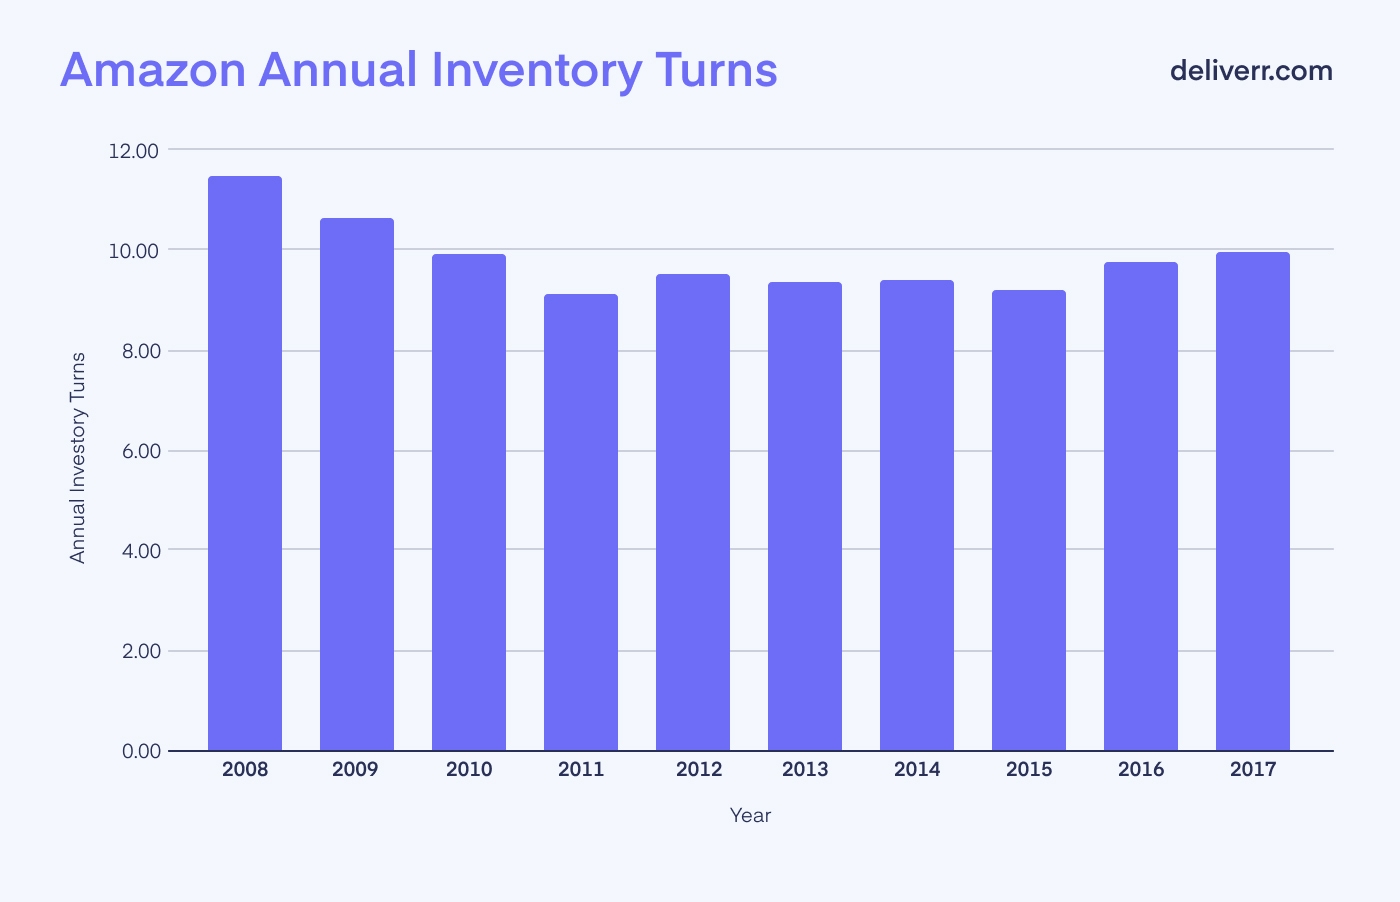 Amazon Annual Inventory Turns